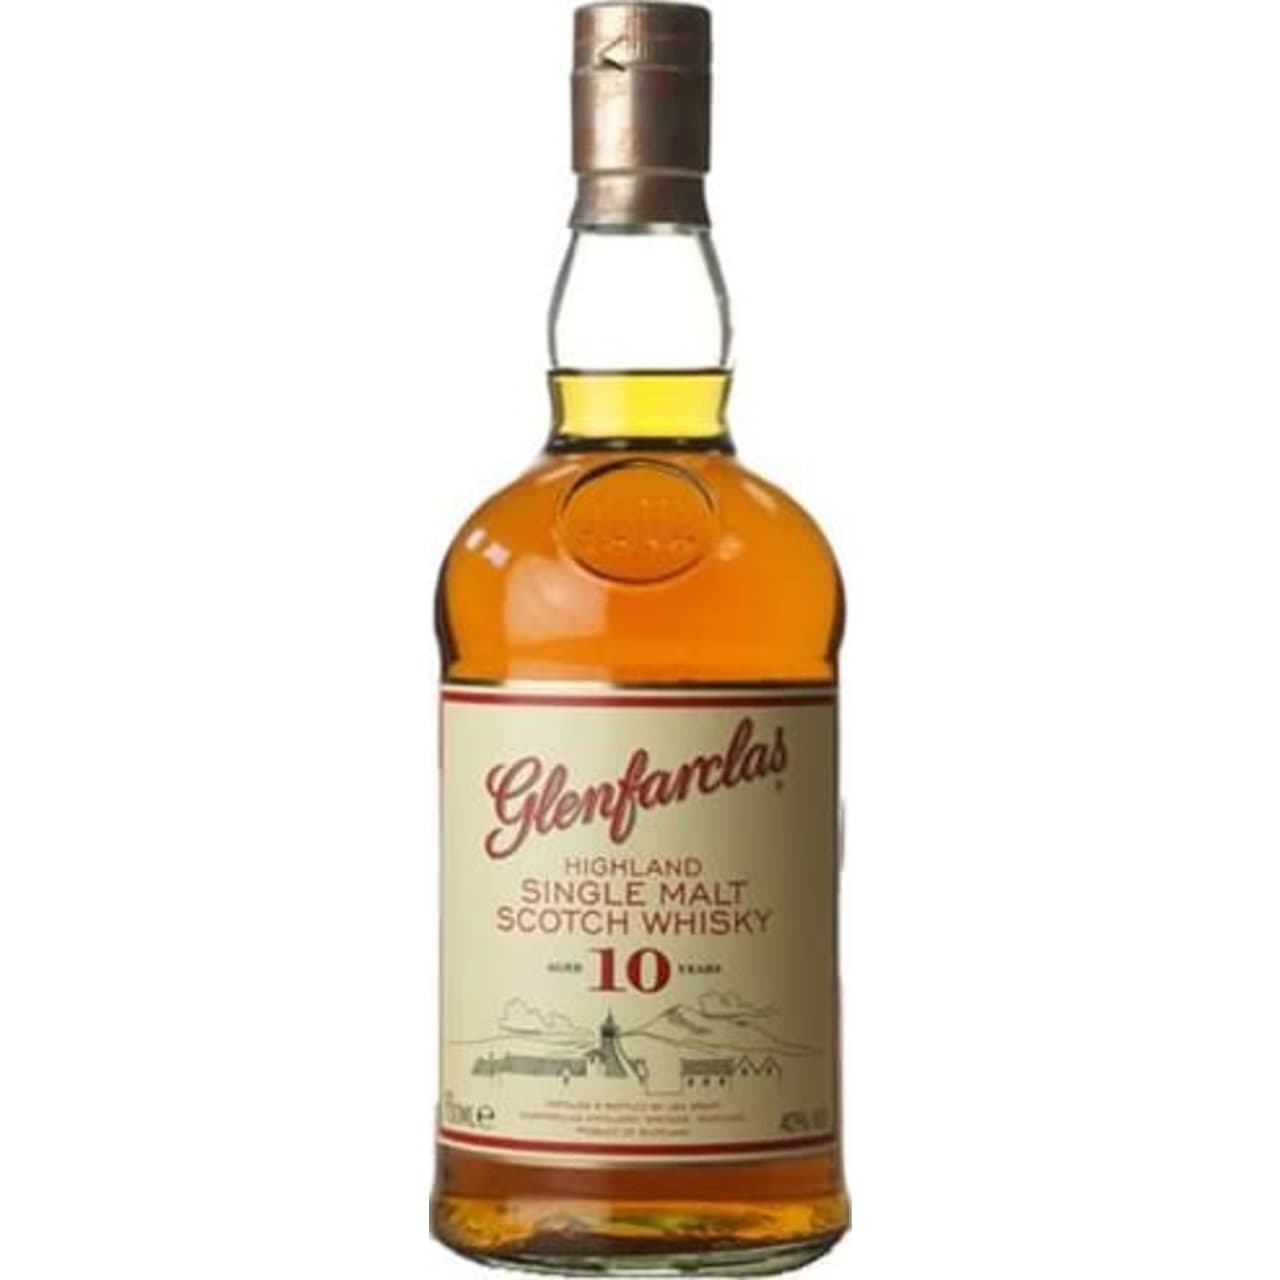 This 10-year-old Highland malt has a wonderful straw gold colour, is delicately light and sweet, with a floral, fruity nose and a long slightly spicy finish.